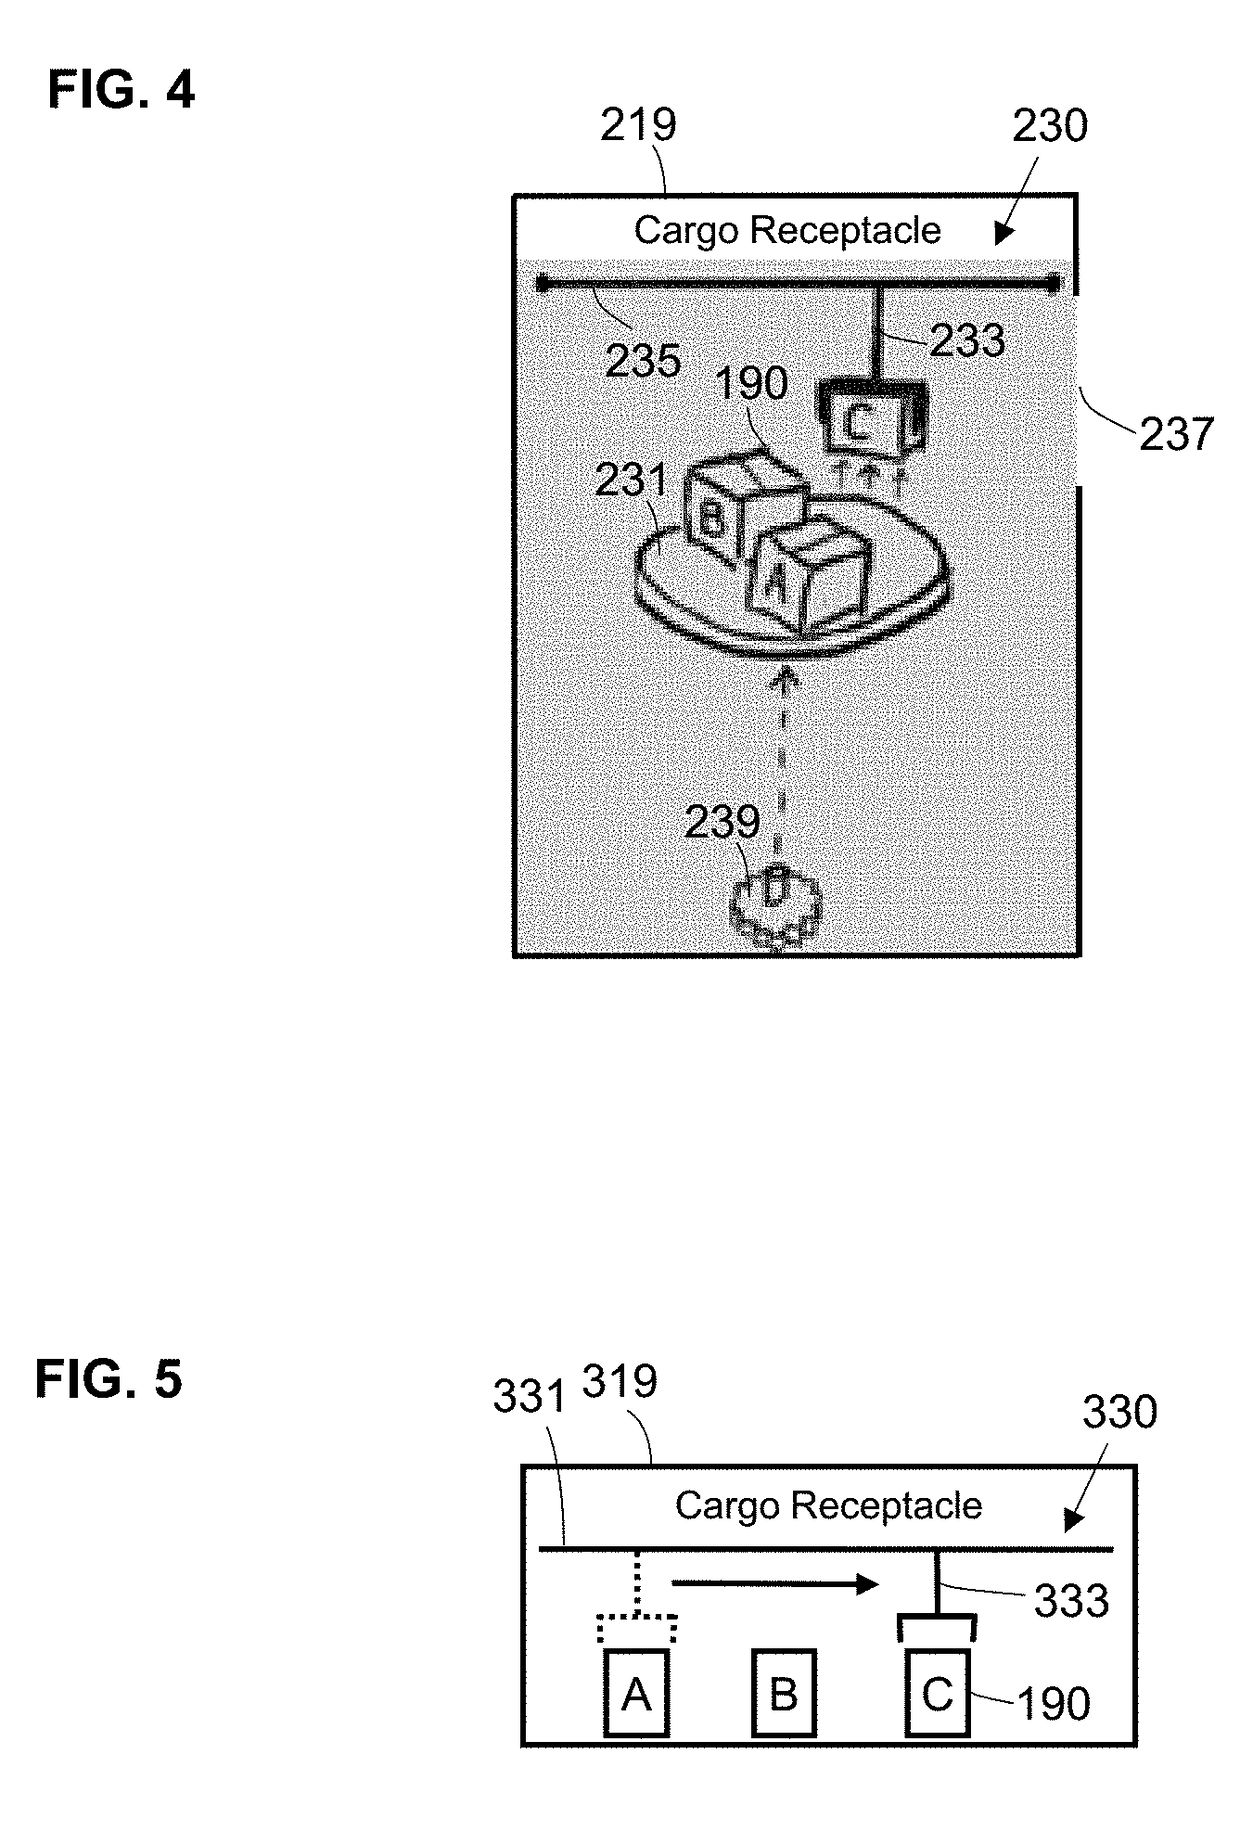 Systems and methods for delivering products to multiple delivery destinations via autonomous transport vehicles